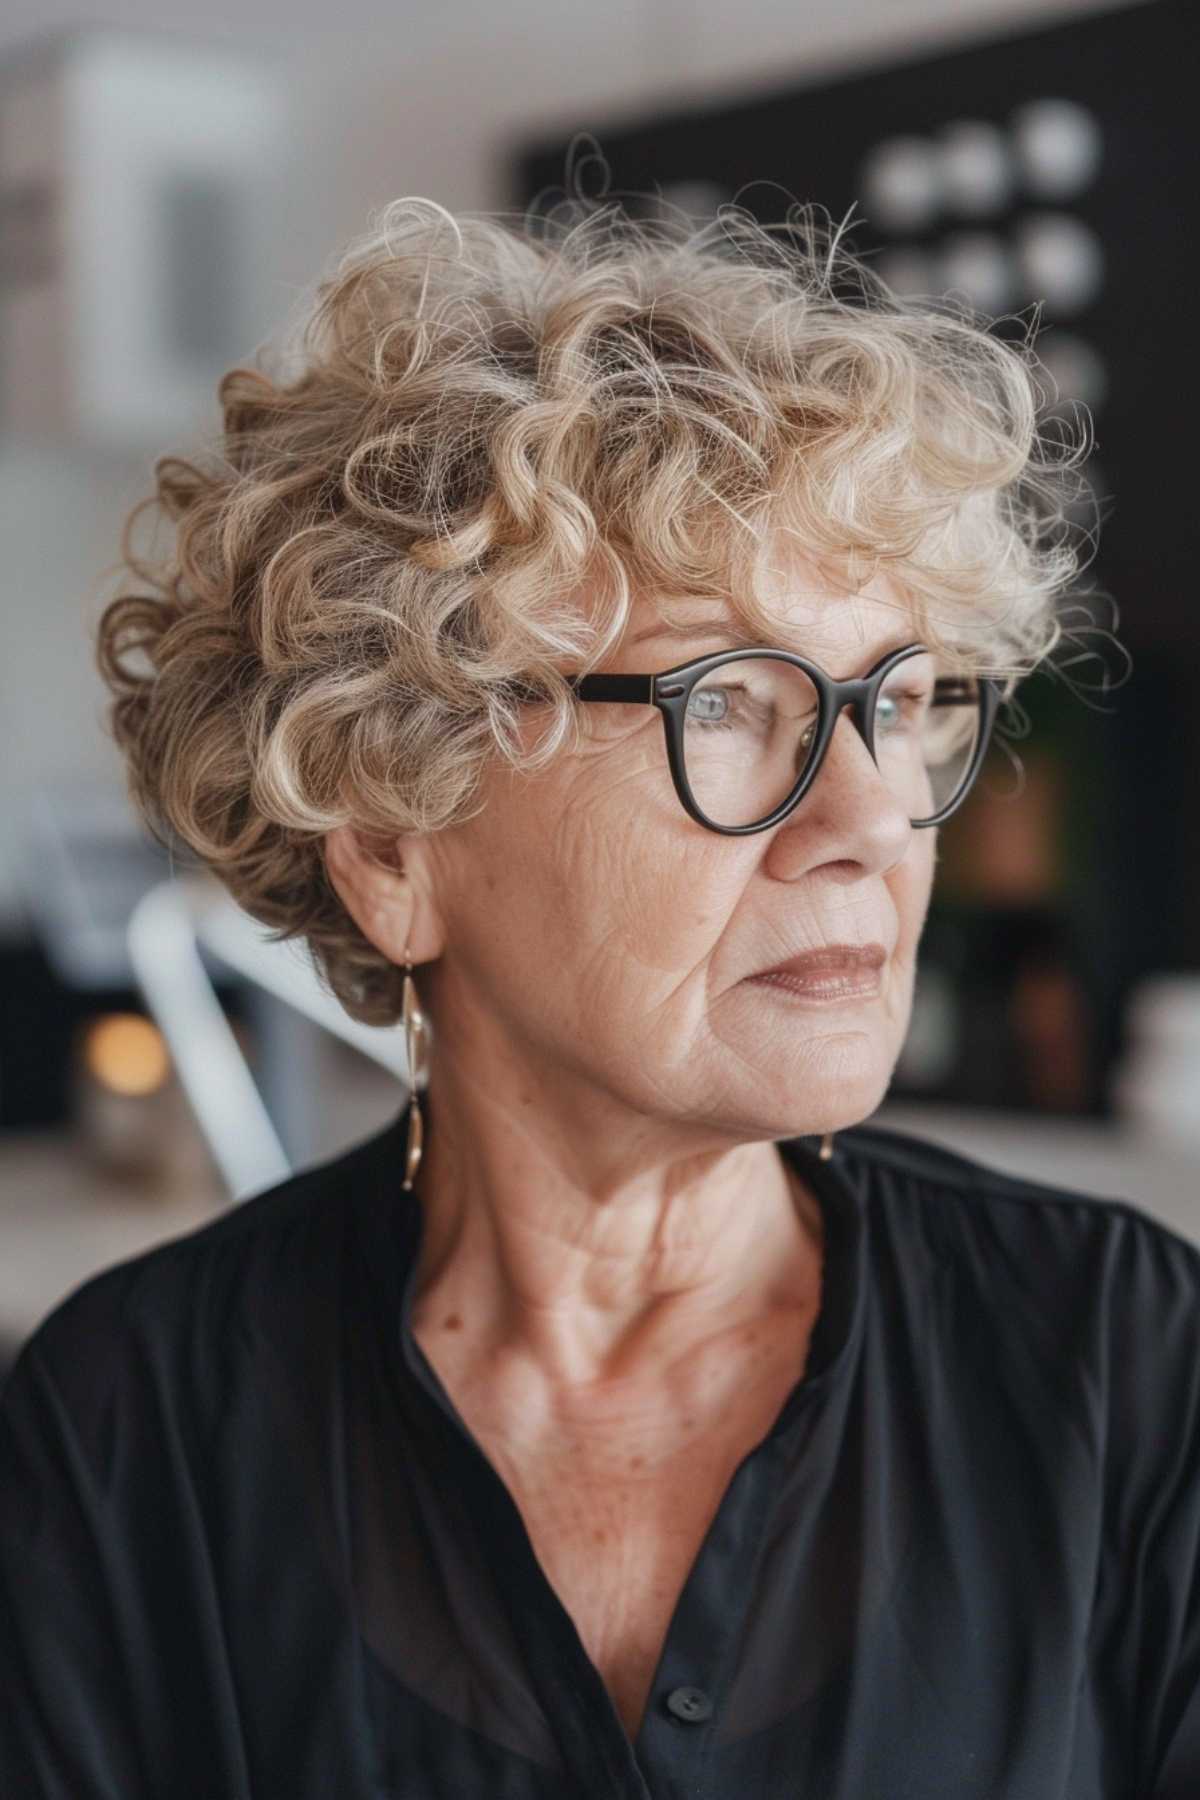 A natural curly pixie cut is perfect for older women who wear glasses.